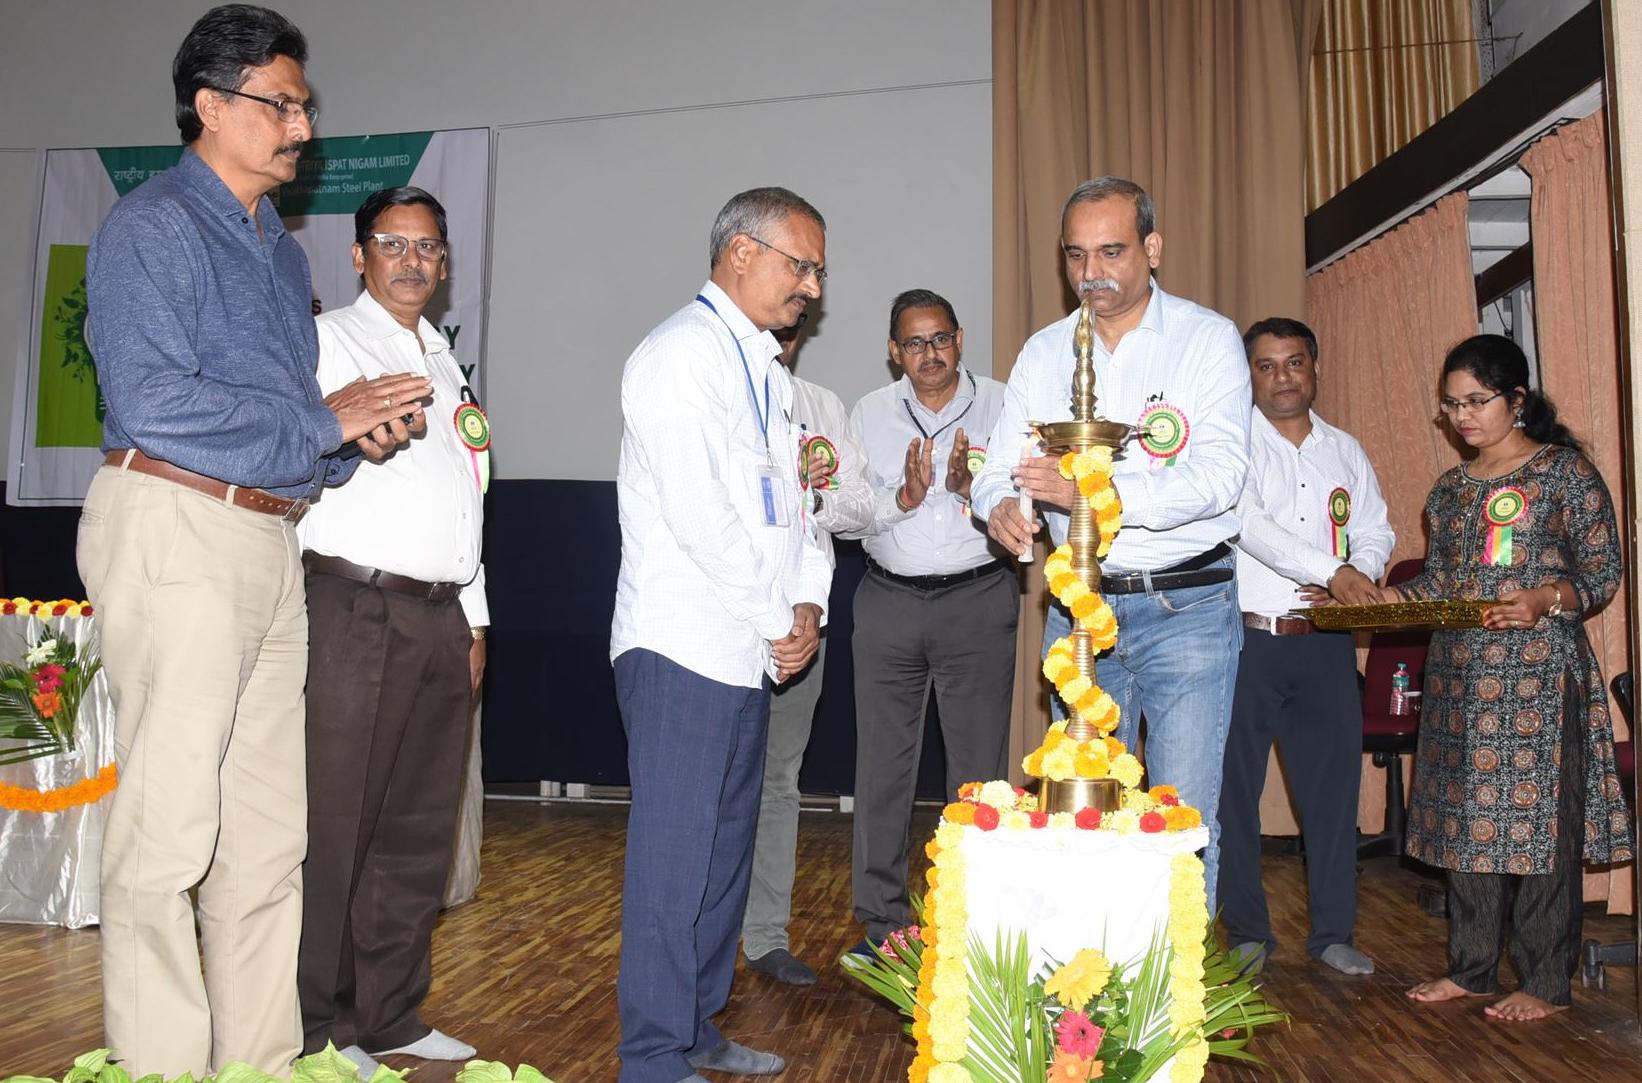 National Energy Conservation day celebrated at RINL